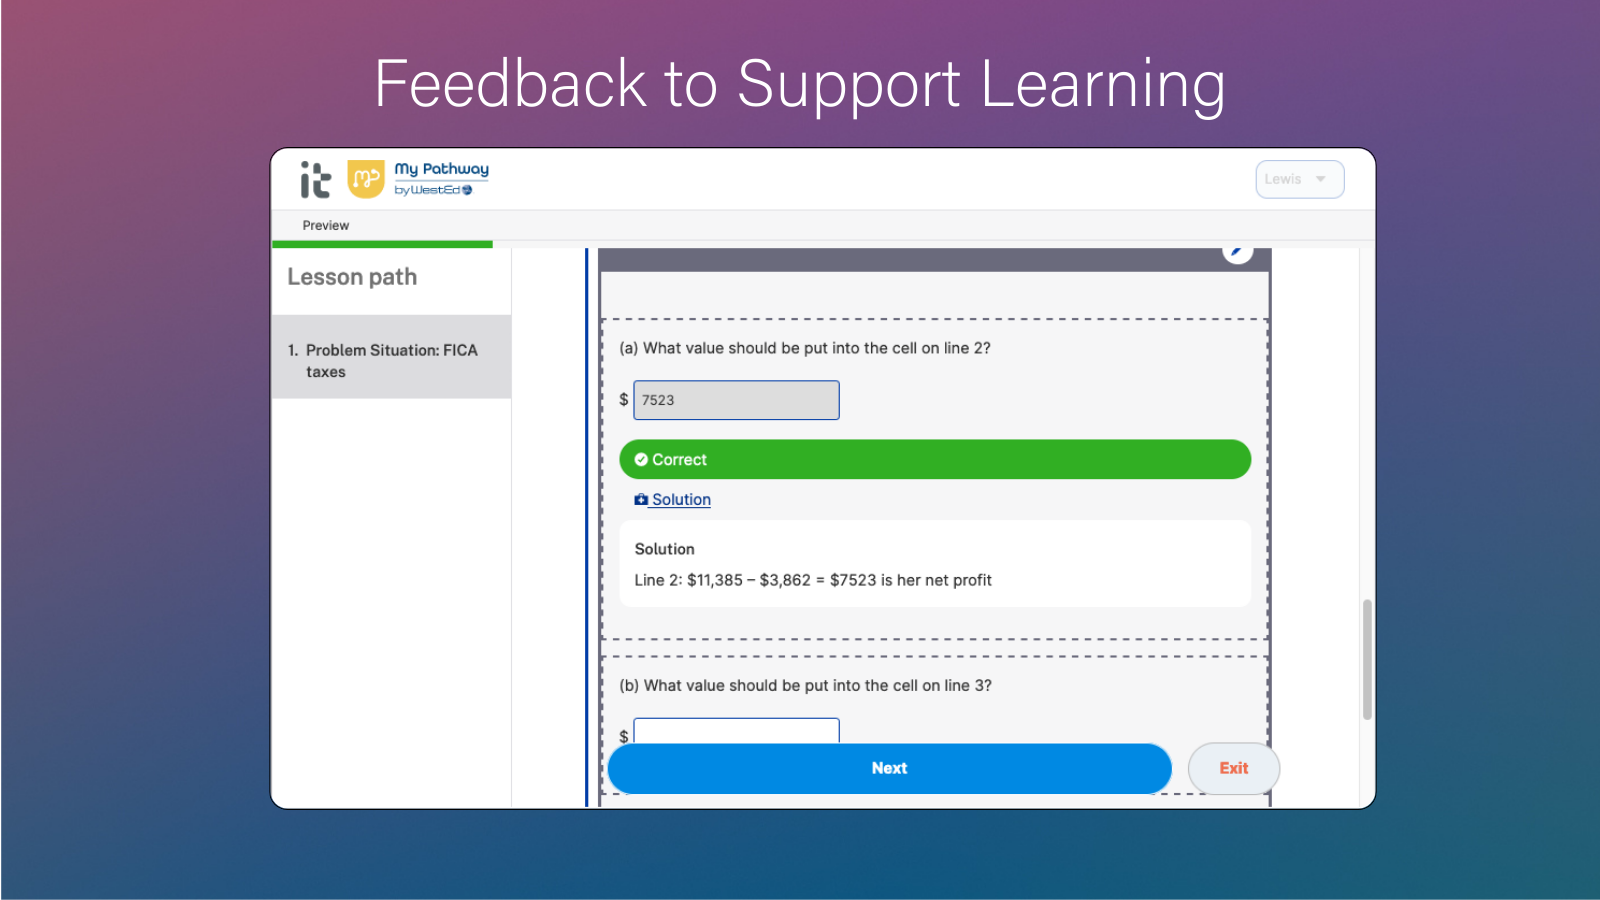 Image entitled Feedback to Support Learning. Shows screenshot of example of courseware generated feedback follow an answer submission.